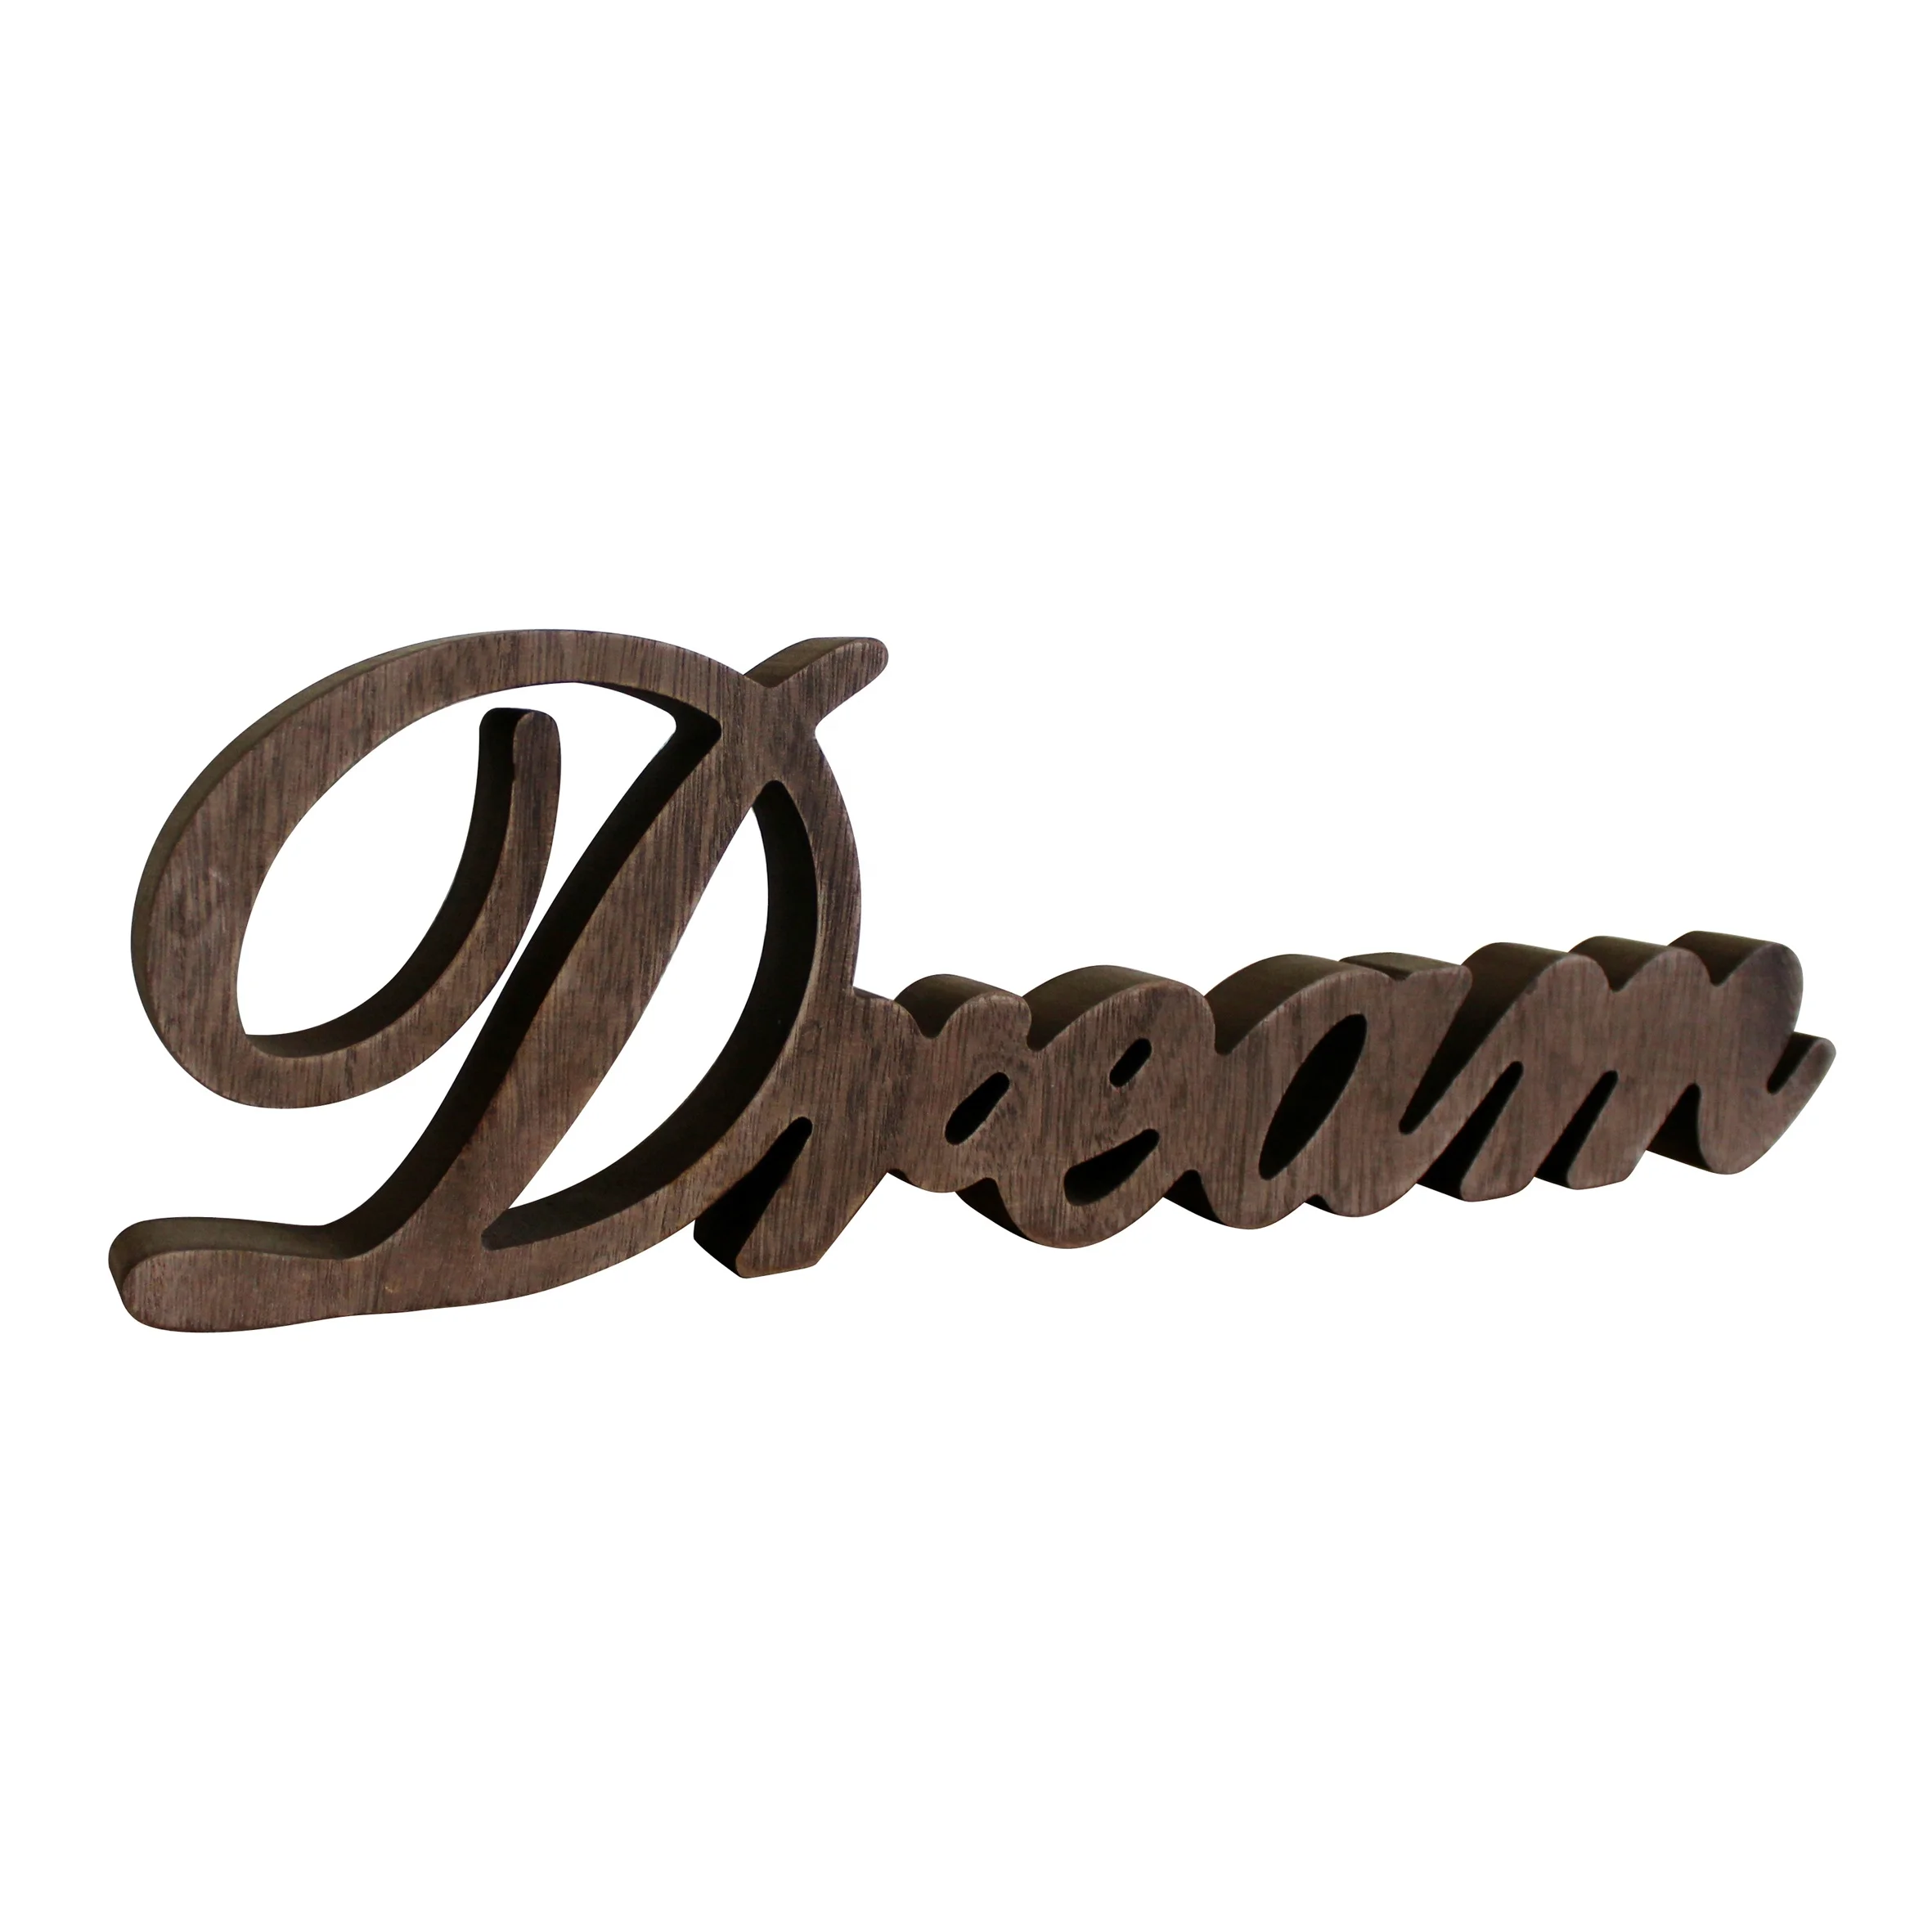 

Rustic Vintage Distressed Wooden Words Sign Free Standing "Dream" Tabletop/Shelf/Home Wall/Office Decoration Art